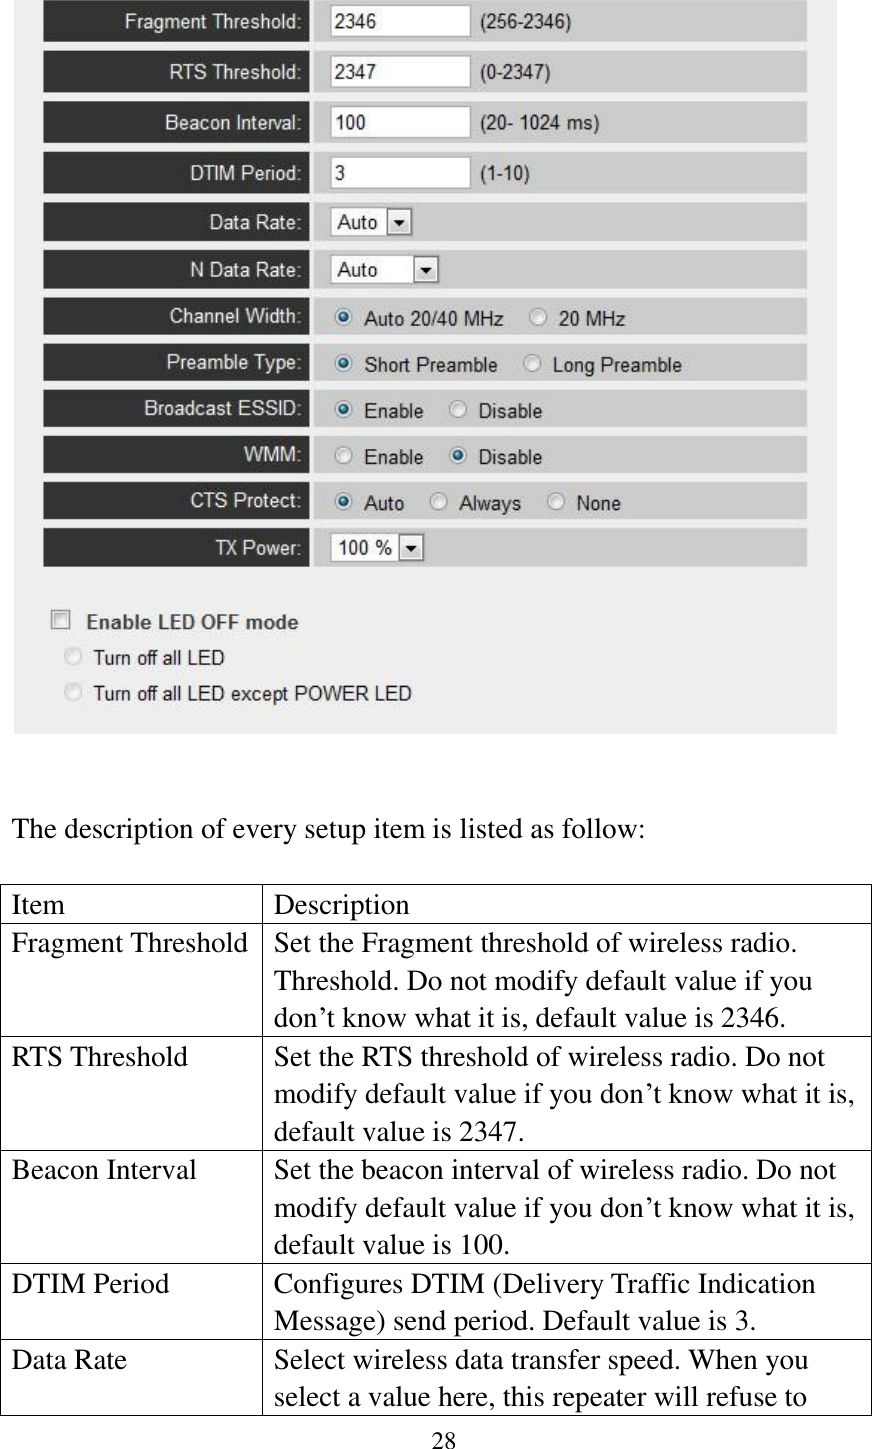 28     The description of every setup item is listed as follow:  Item Description Fragment Threshold Set the Fragment threshold of wireless radio. Threshold. Do not modify default value if you don‟t know what it is, default value is 2346. RTS Threshold Set the RTS threshold of wireless radio. Do not modify default value if you don‟t know what it is, default value is 2347. Beacon Interval Set the beacon interval of wireless radio. Do not modify default value if you don‟t know what it is, default value is 100. DTIM Period Configures DTIM (Delivery Traffic Indication Message) send period. Default value is 3. Data Rate Select wireless data transfer speed. When you select a value here, this repeater will refuse to 